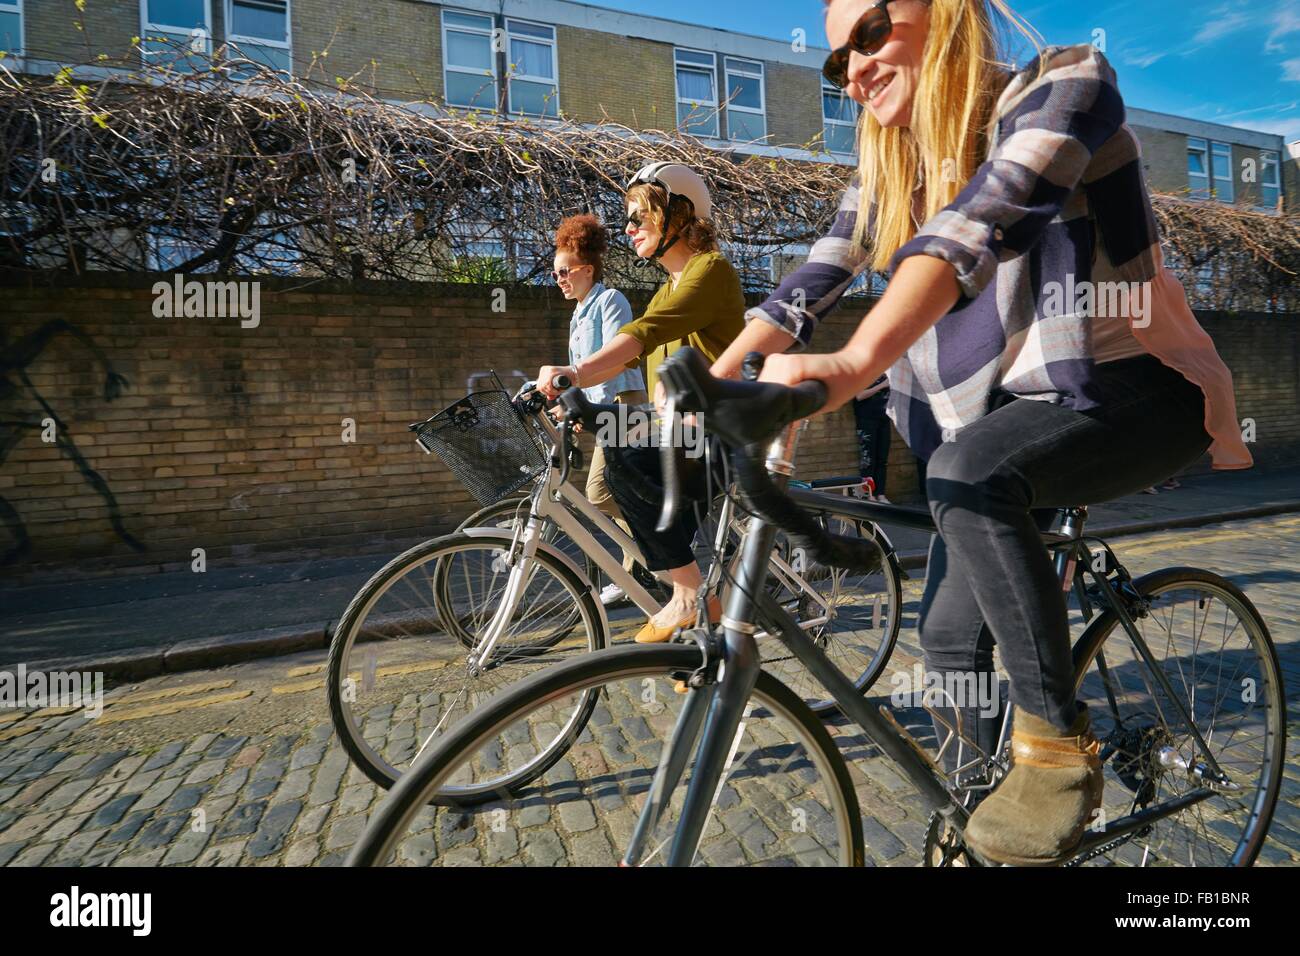 Side view of women cycling on bicycles on cobblestone road Stock Photo